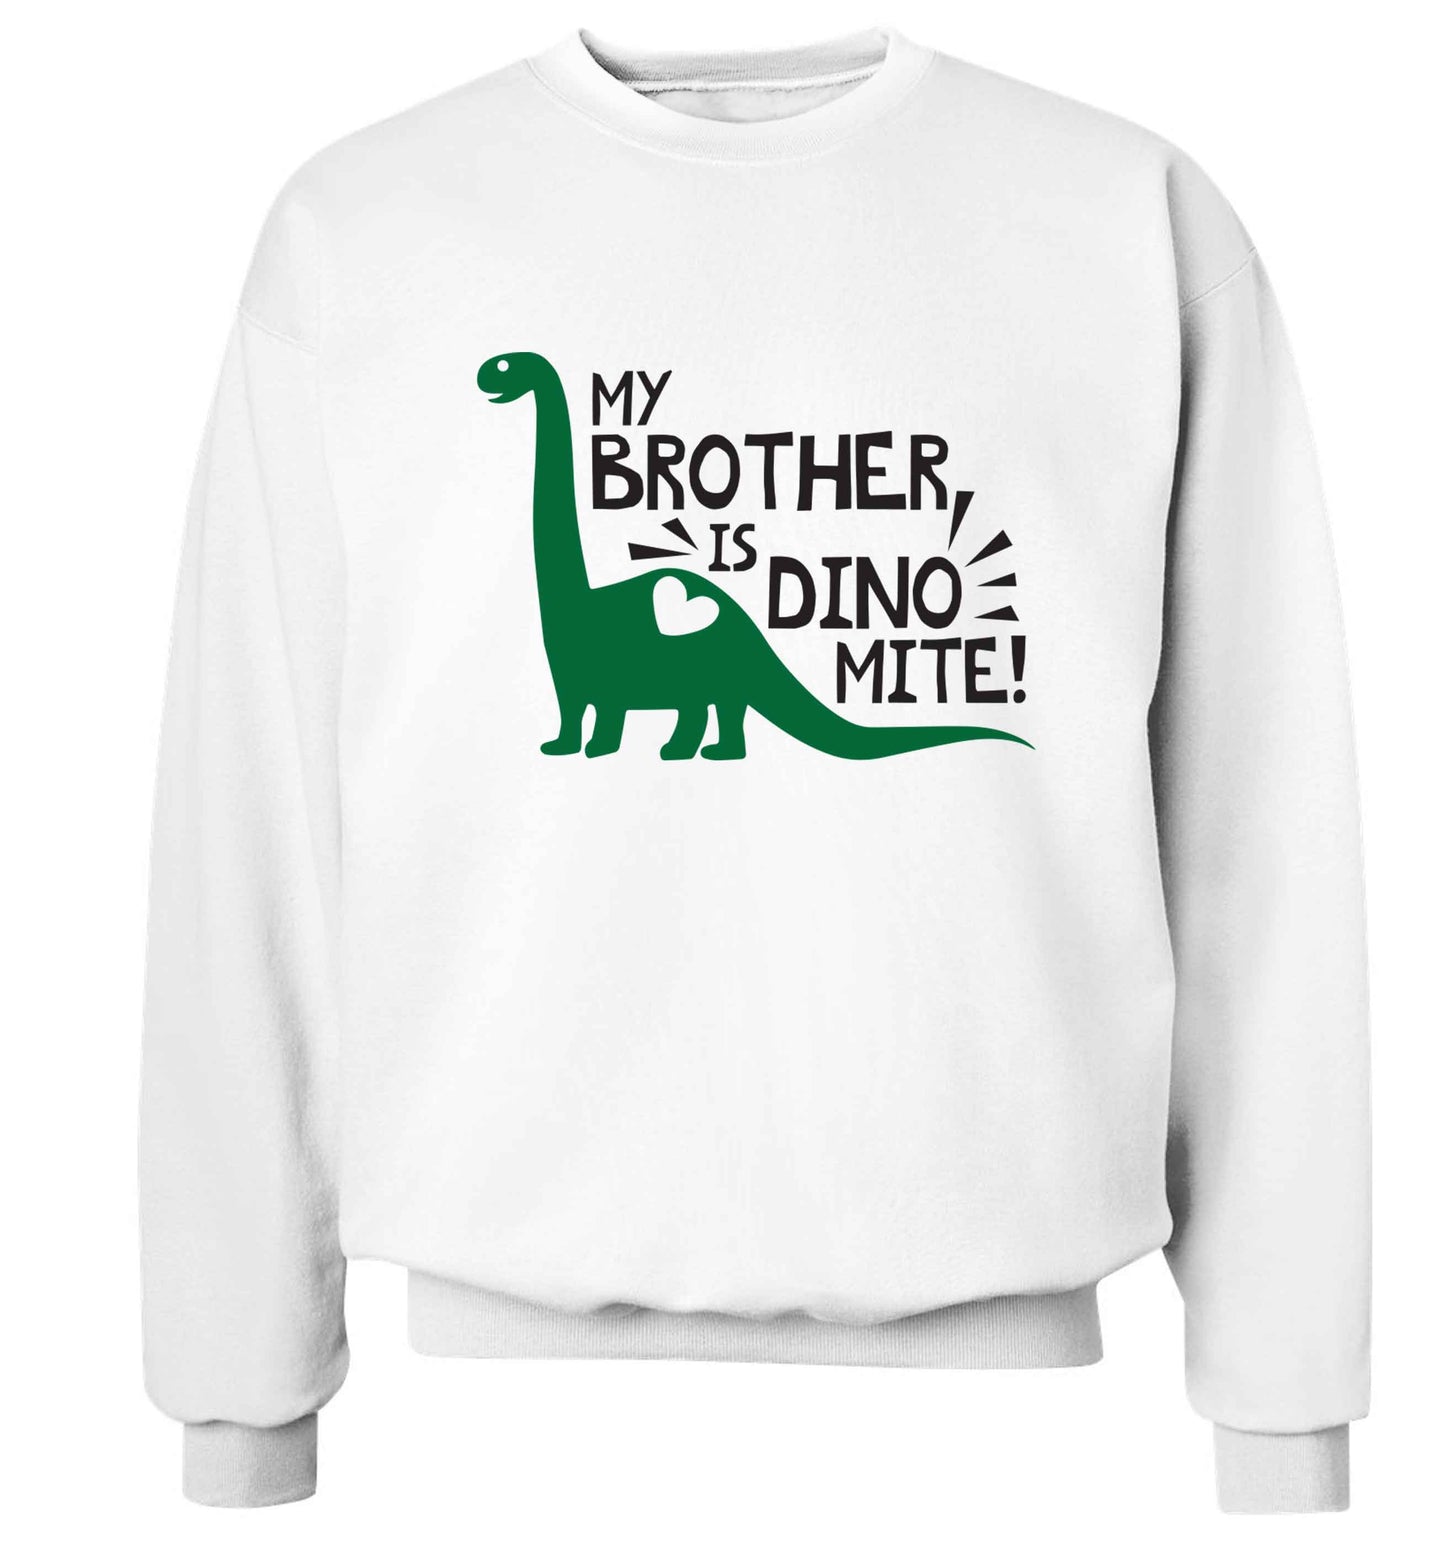 My brother is dinomite! Adult's unisex white Sweater 2XL